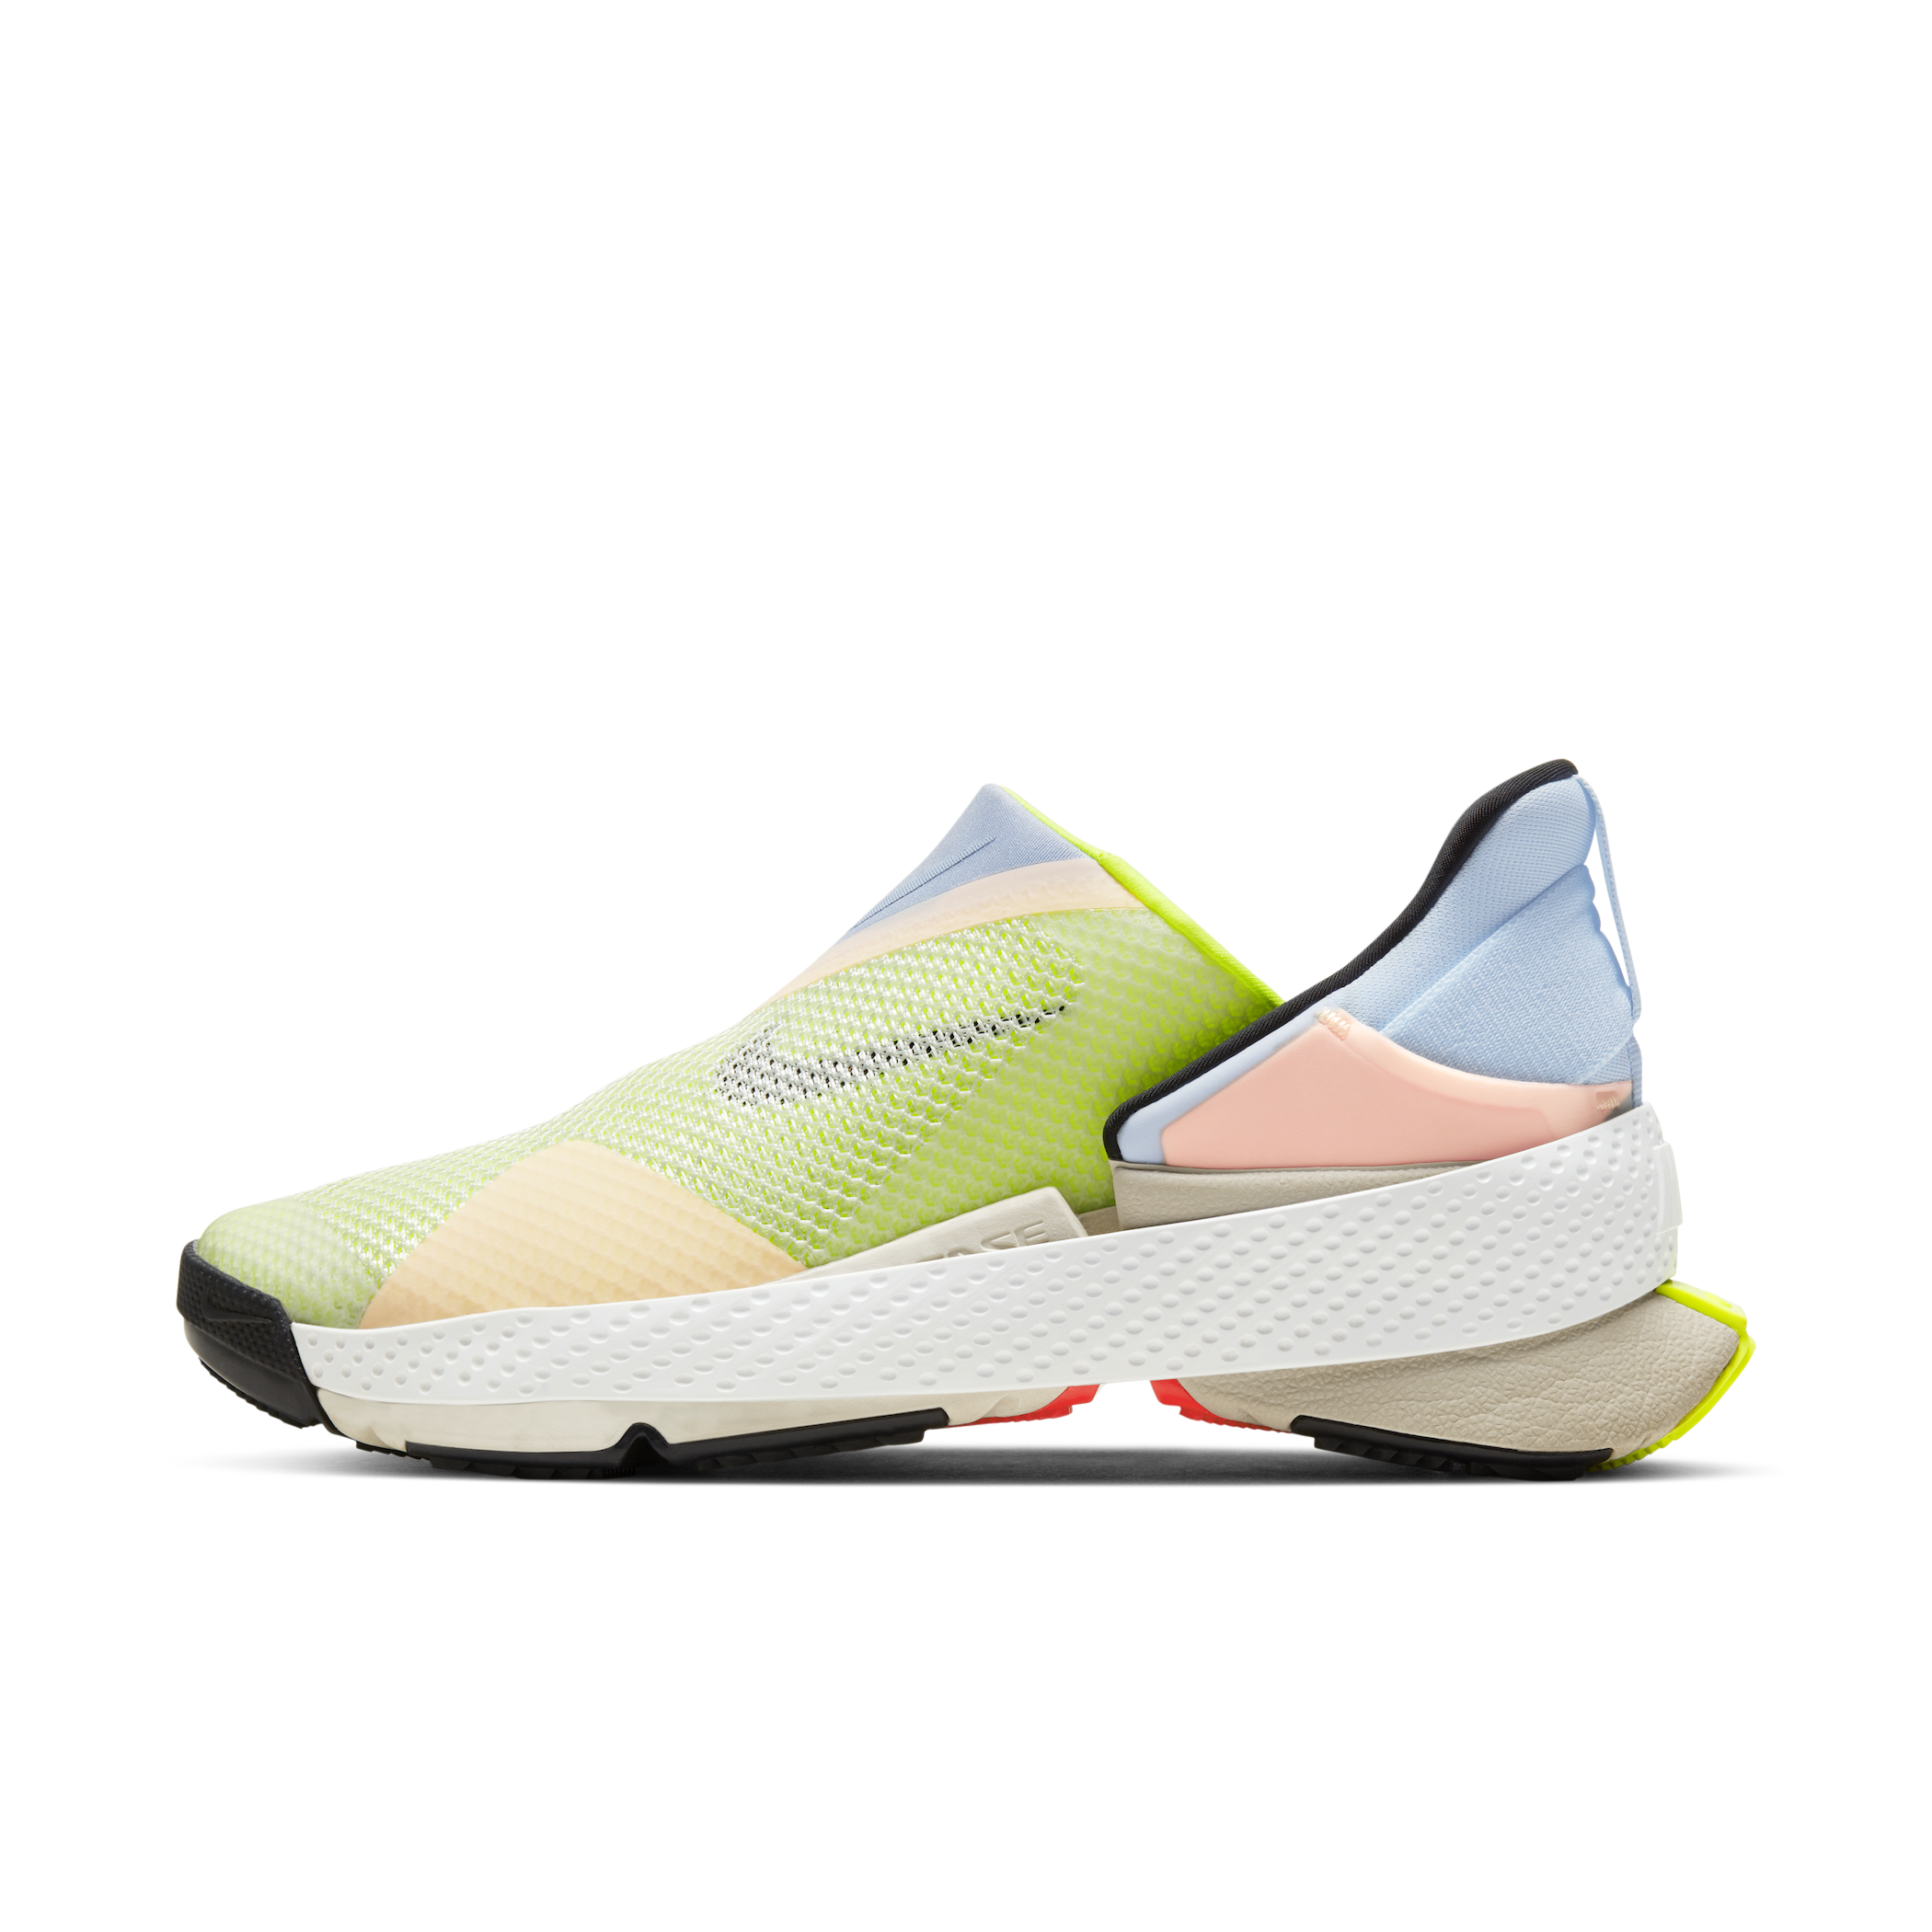 Nike's hands-free FlyEase Go shoes look very comfortable and the 